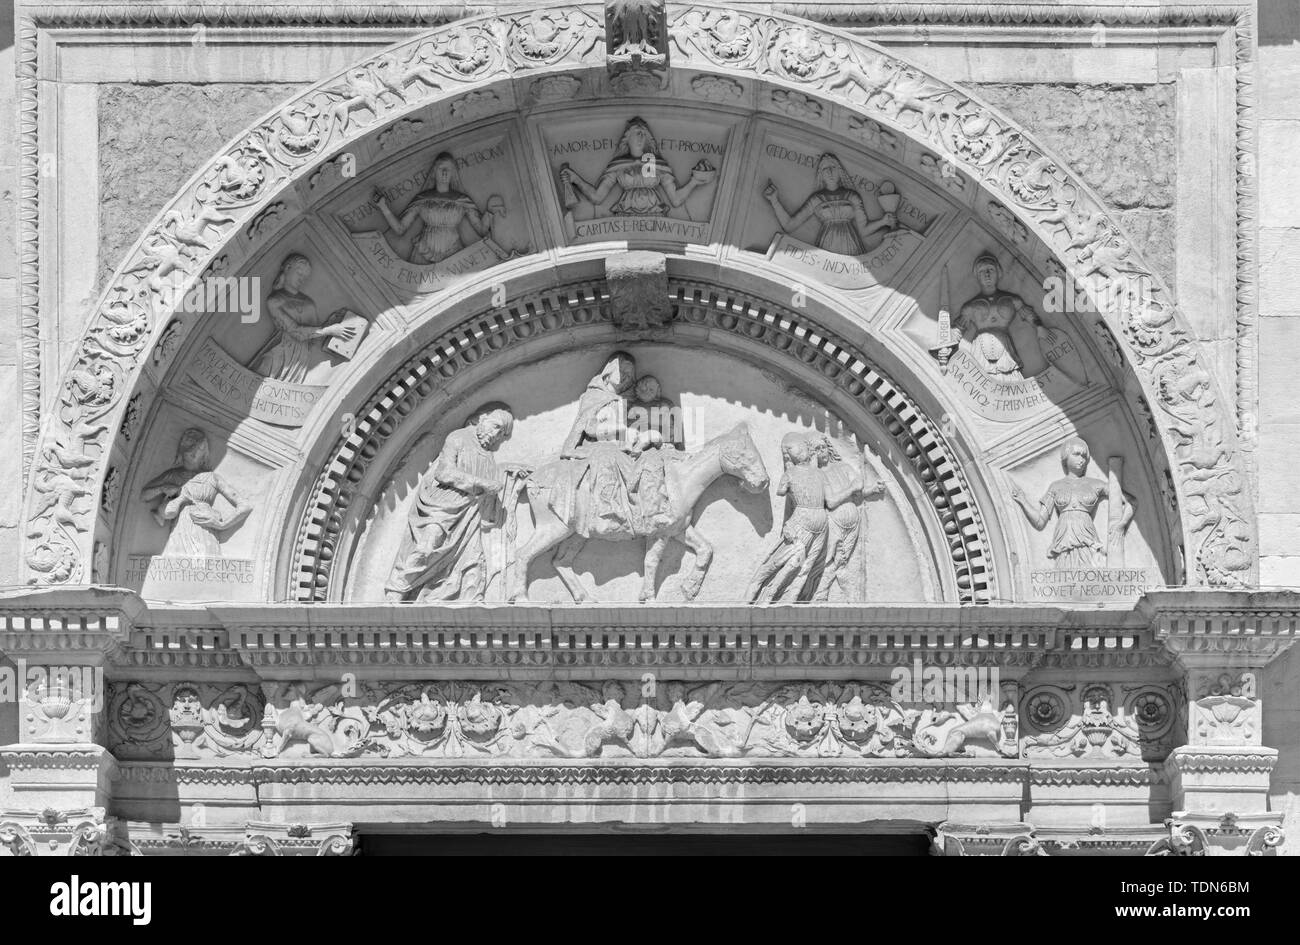 COMO, ITALY - MAY 9, 2015: The side portal of Duomo - cathedral with the relief of Flight to Egypt biblical scene. Stock Photo